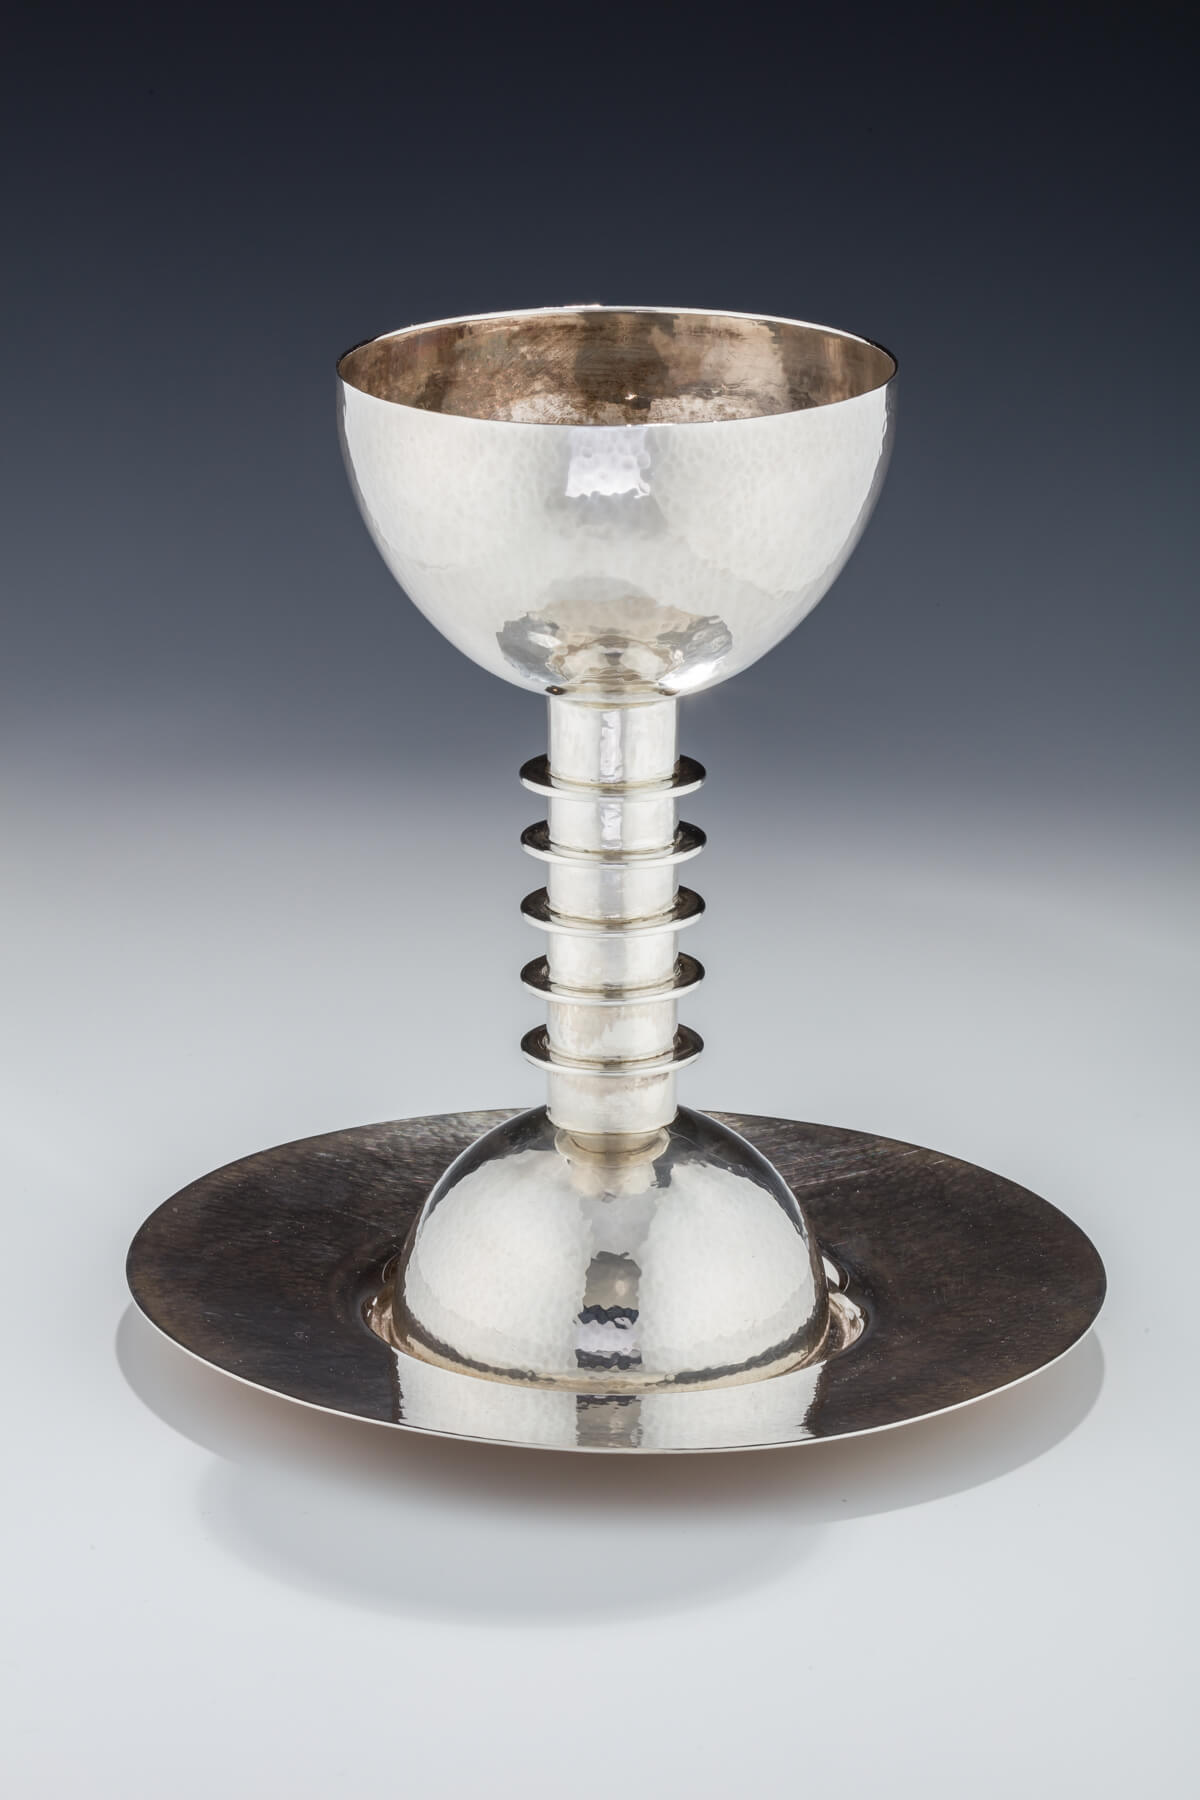 122. Large Silver Kiddush Cup and Underplate by David Gumbel